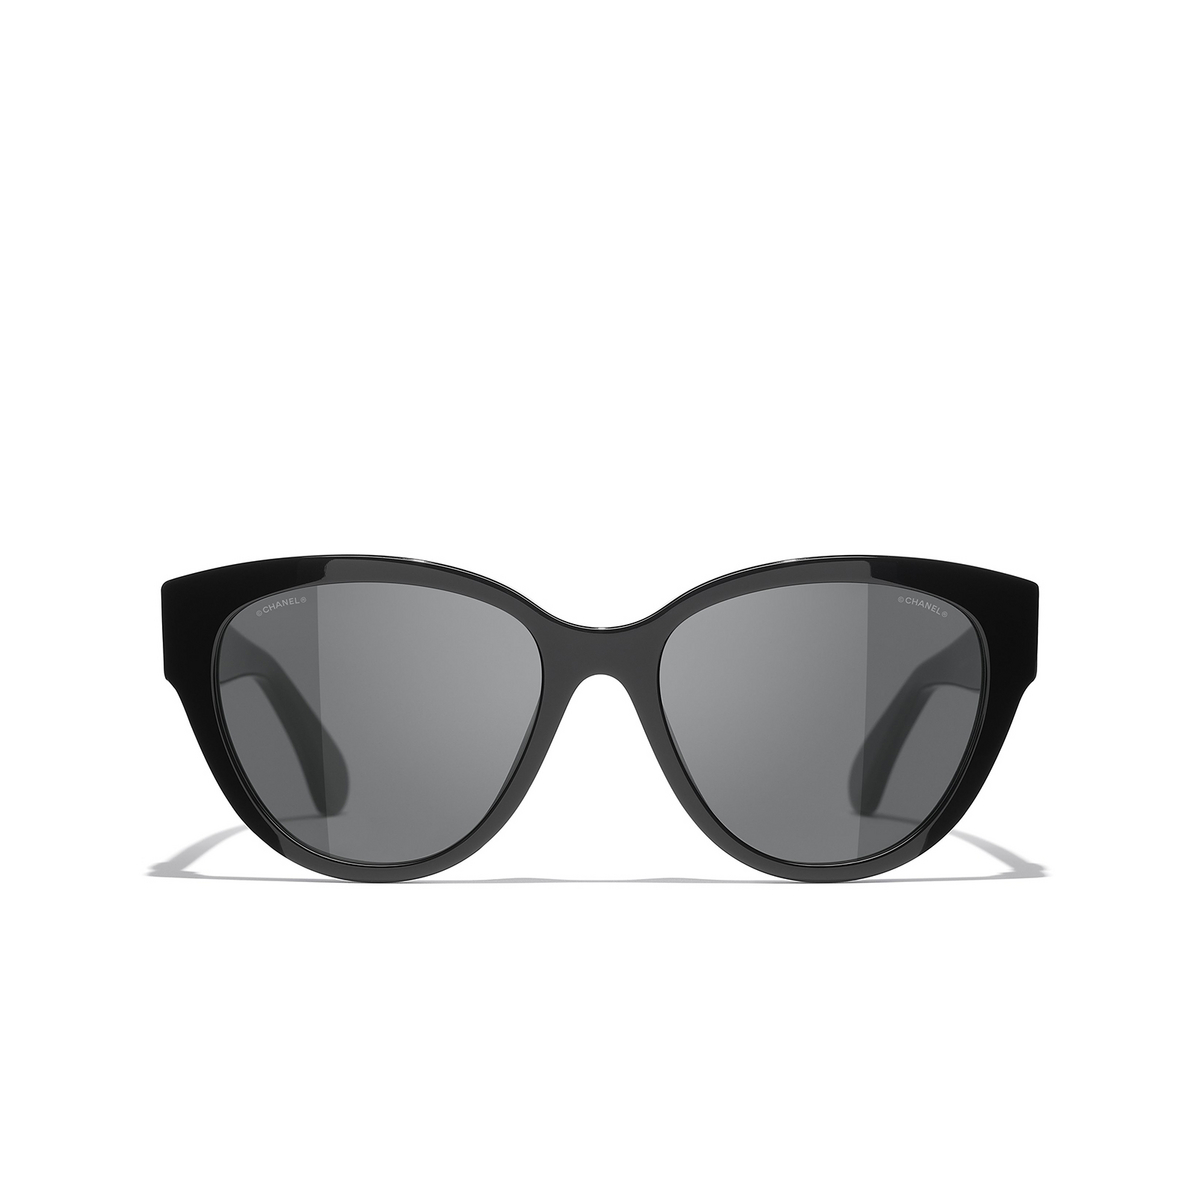 CHANEL butterfly Sunglasses C501S4 Black - front view